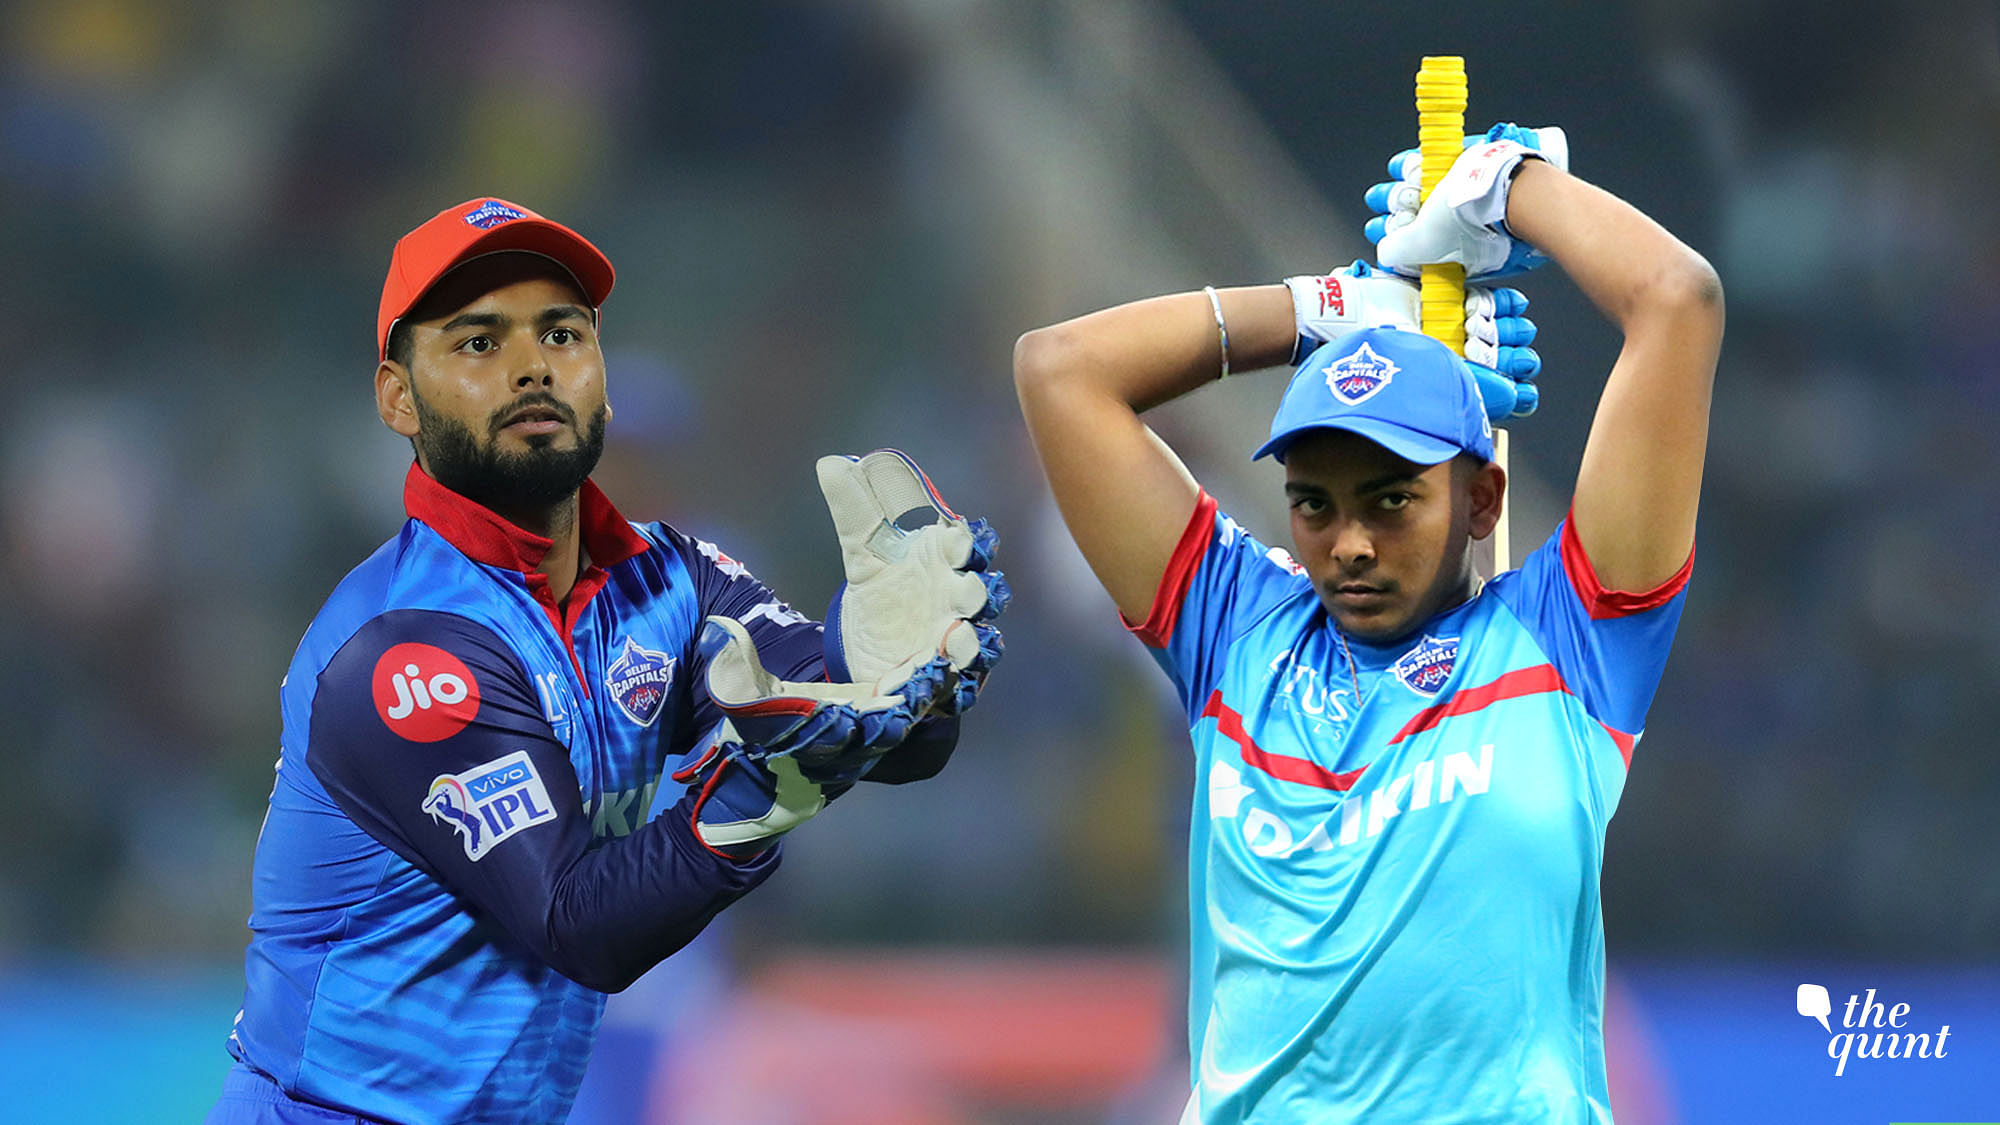 Two Delhi Capitals youngsters, Rishabh Pant and Prithvi Shaw, have come under the spotlight for their top performances, and also their fumbles.